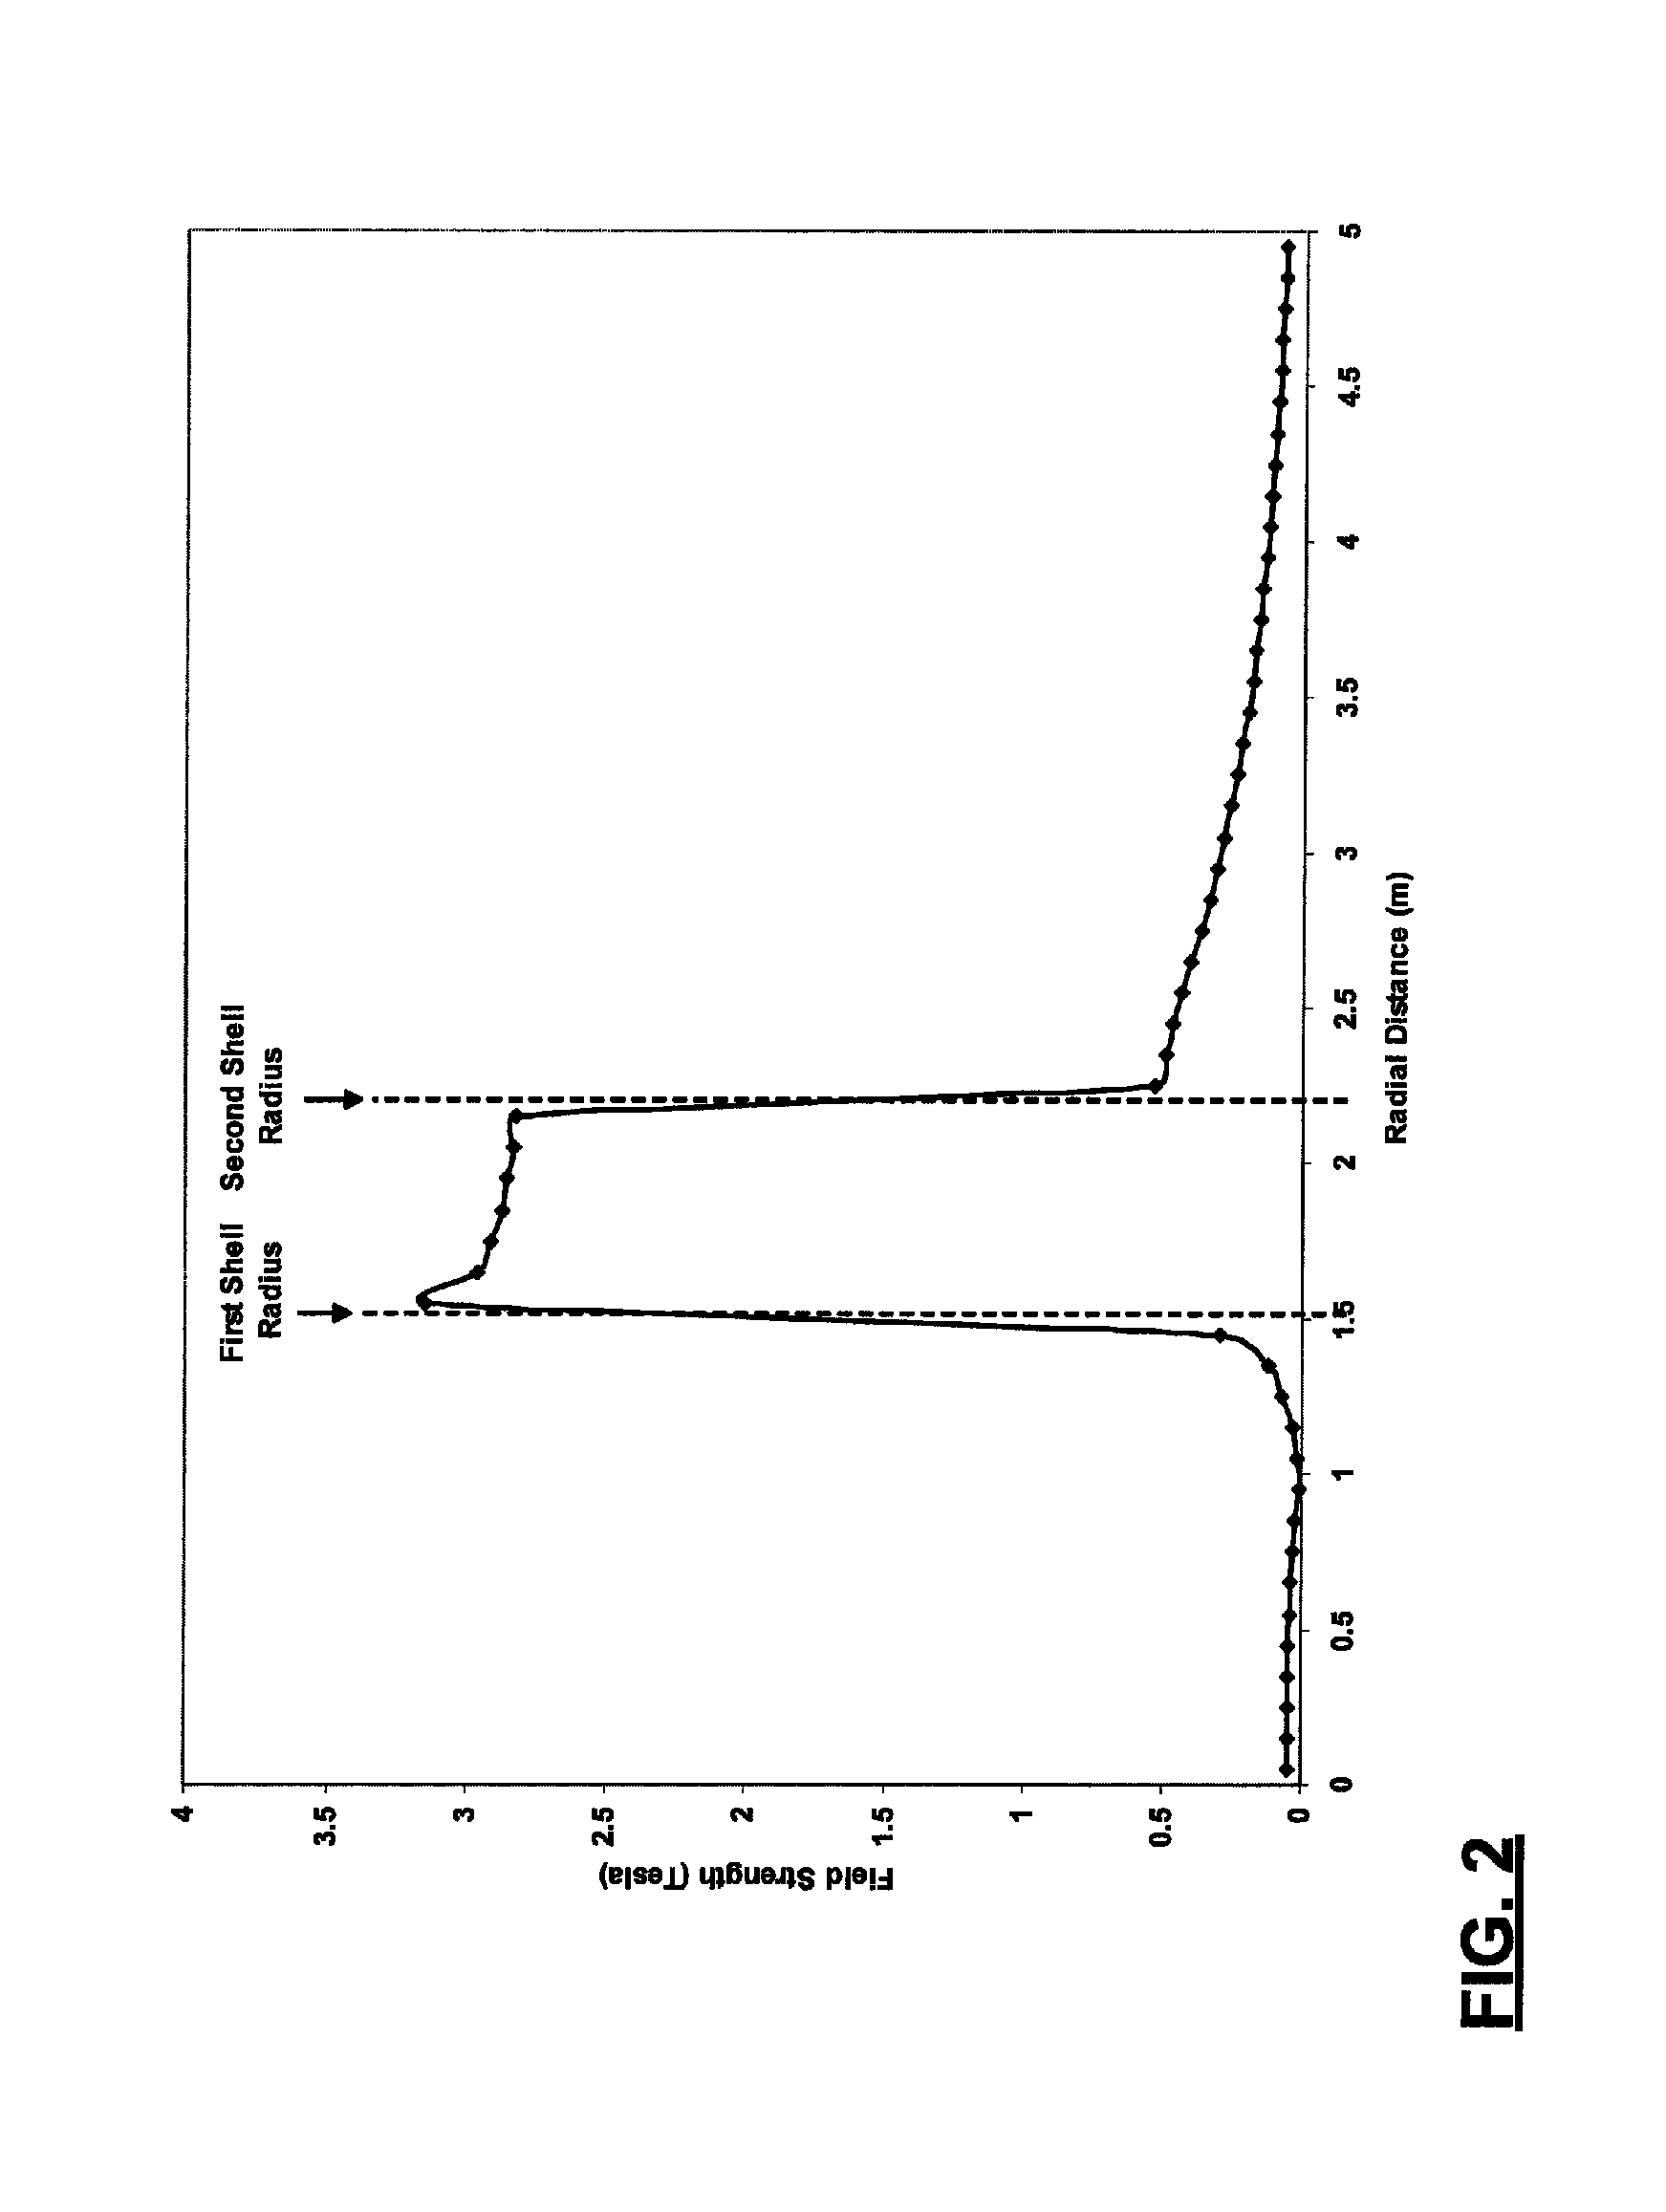 Radiation shield device and associated method